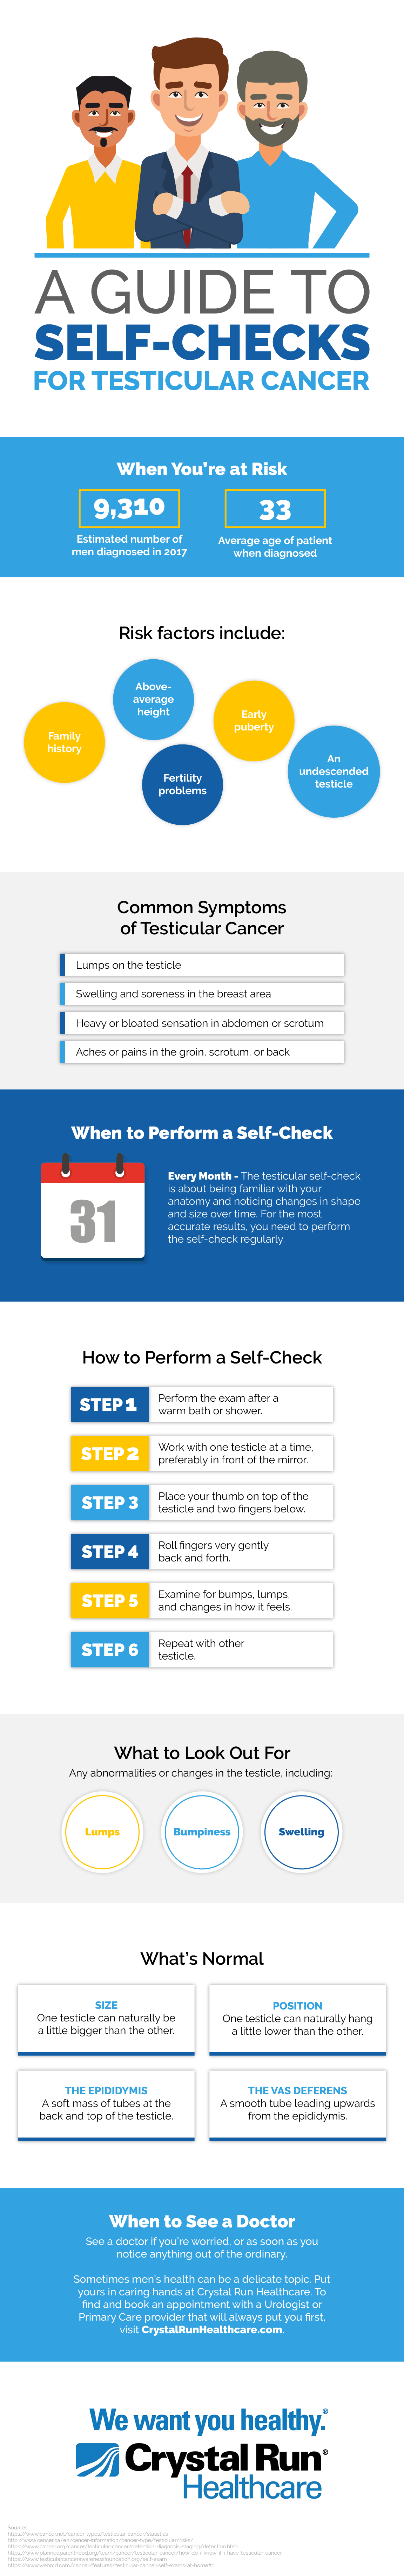 Testicular Cancer Self-Check Guide Infographic